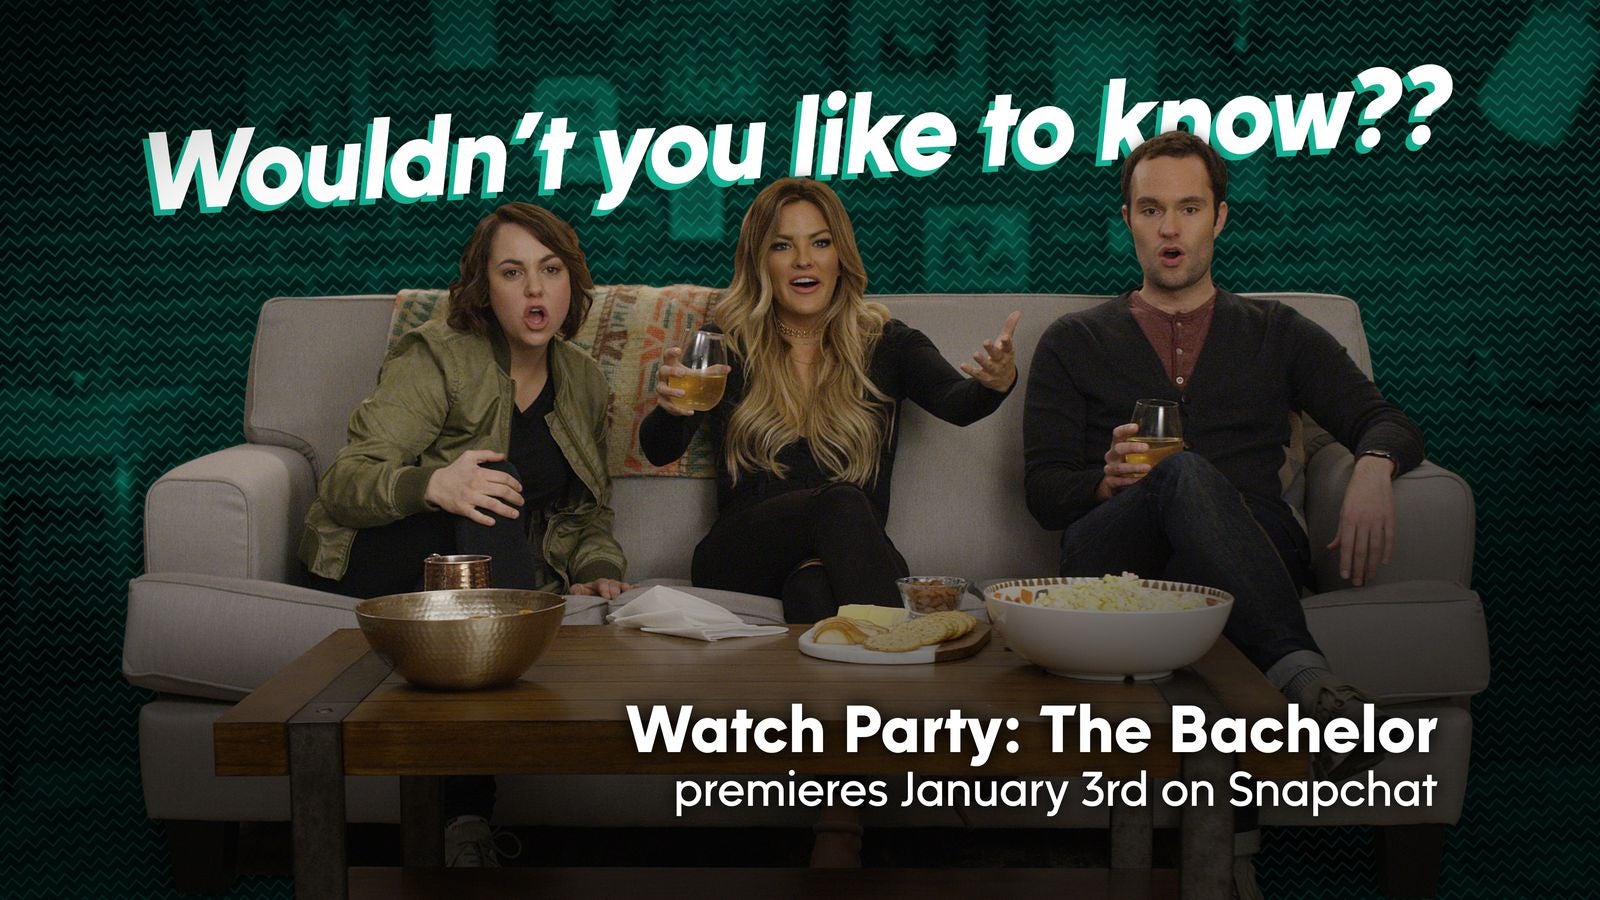 ABC&rsquo;s 'Watch Party - The Bachelor' is one of the original shows on Snapchat TV - Snapchat TV bets on original content, wants two or three new show episodes per day